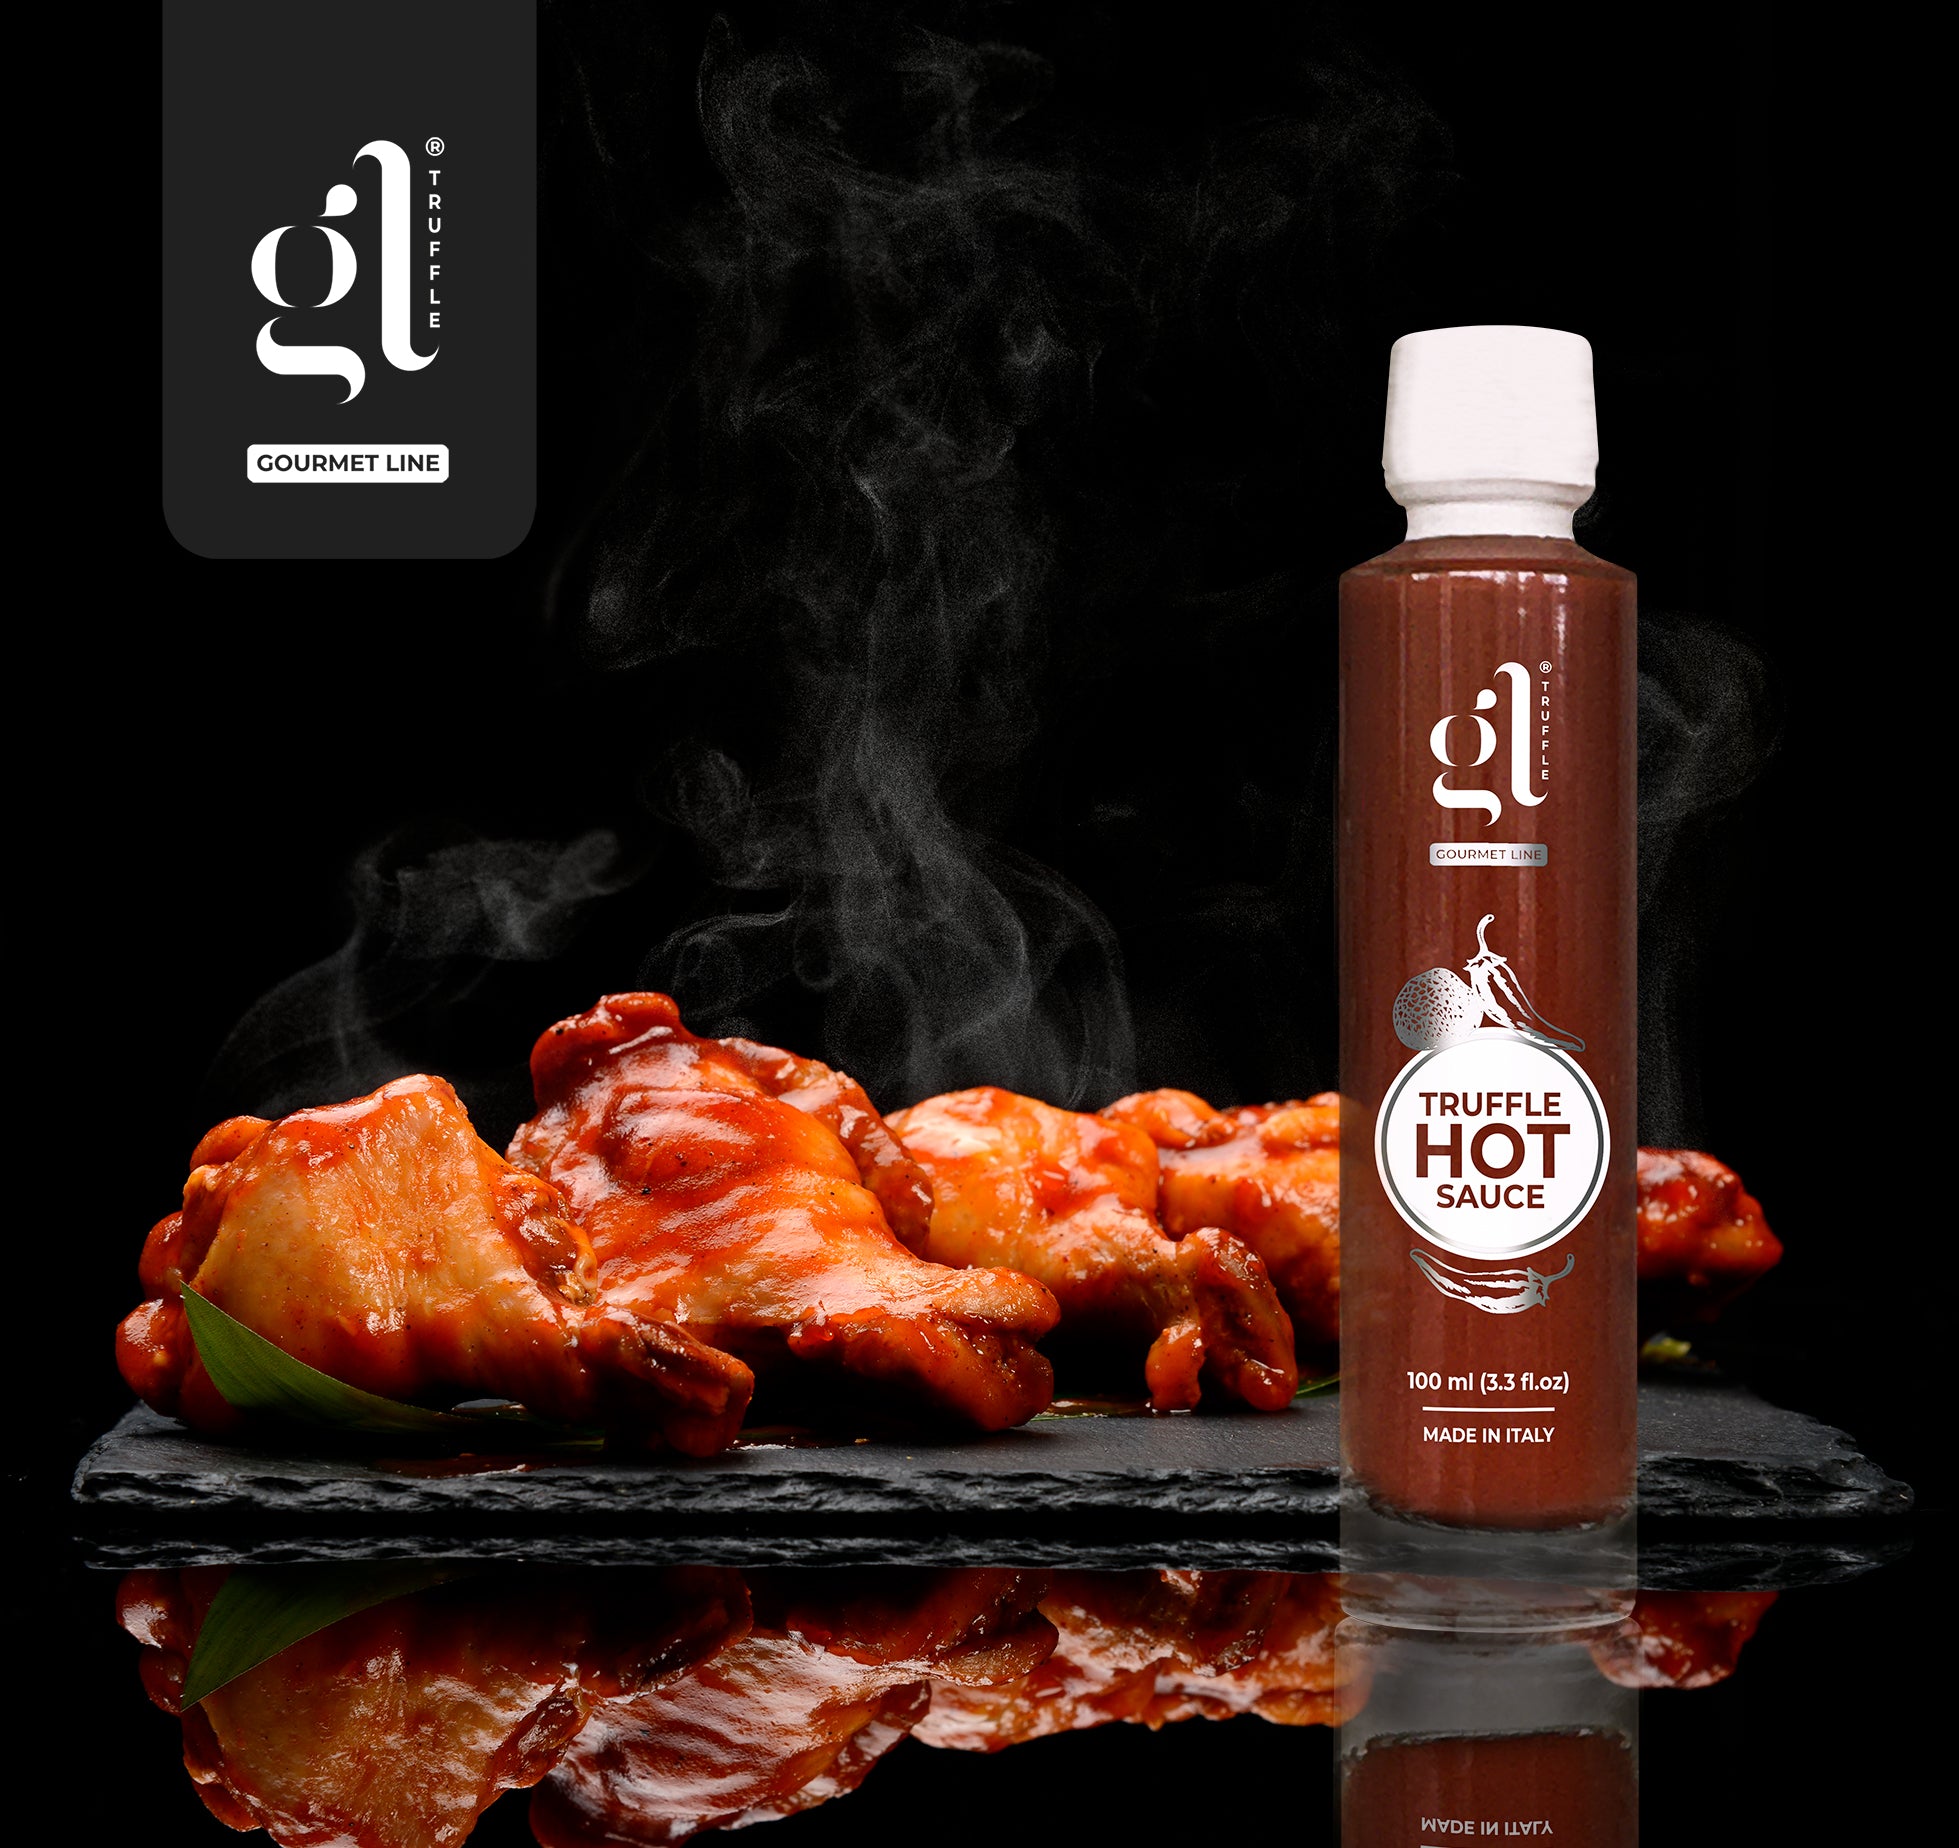 Fiery and flavorful - Enjoy the perfect blend of heat from ripe chili peppers and the earthy richness of black summer truffle. Gourmet condiment - Elevate your dishes with a touch of luxury and complexity, adding depth to your culinary creations.